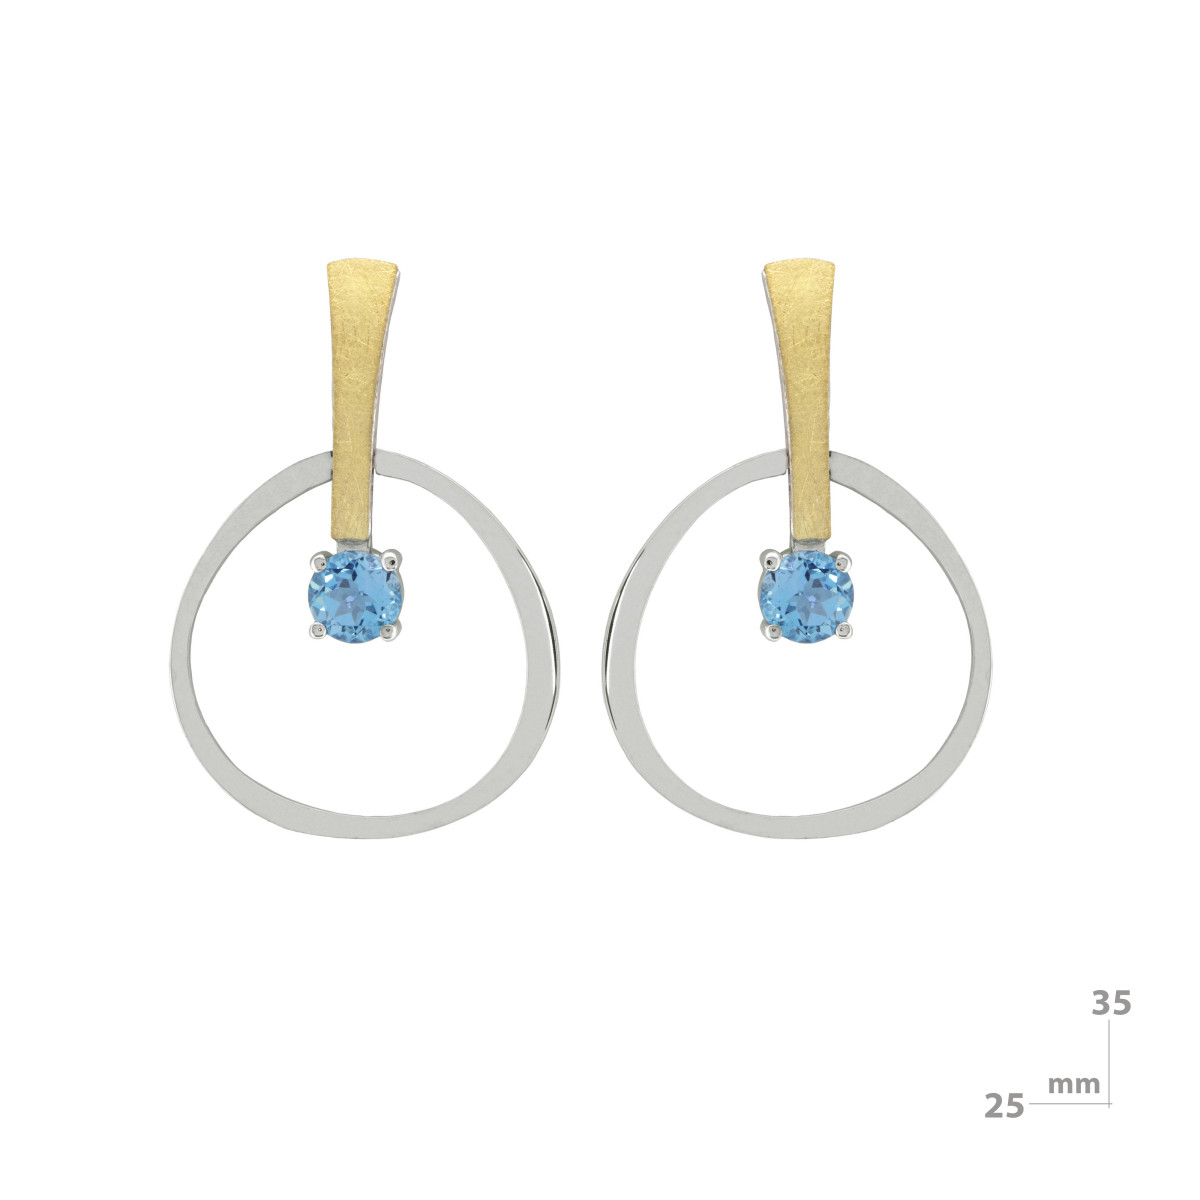 Silver, gold and blue topaz earrings